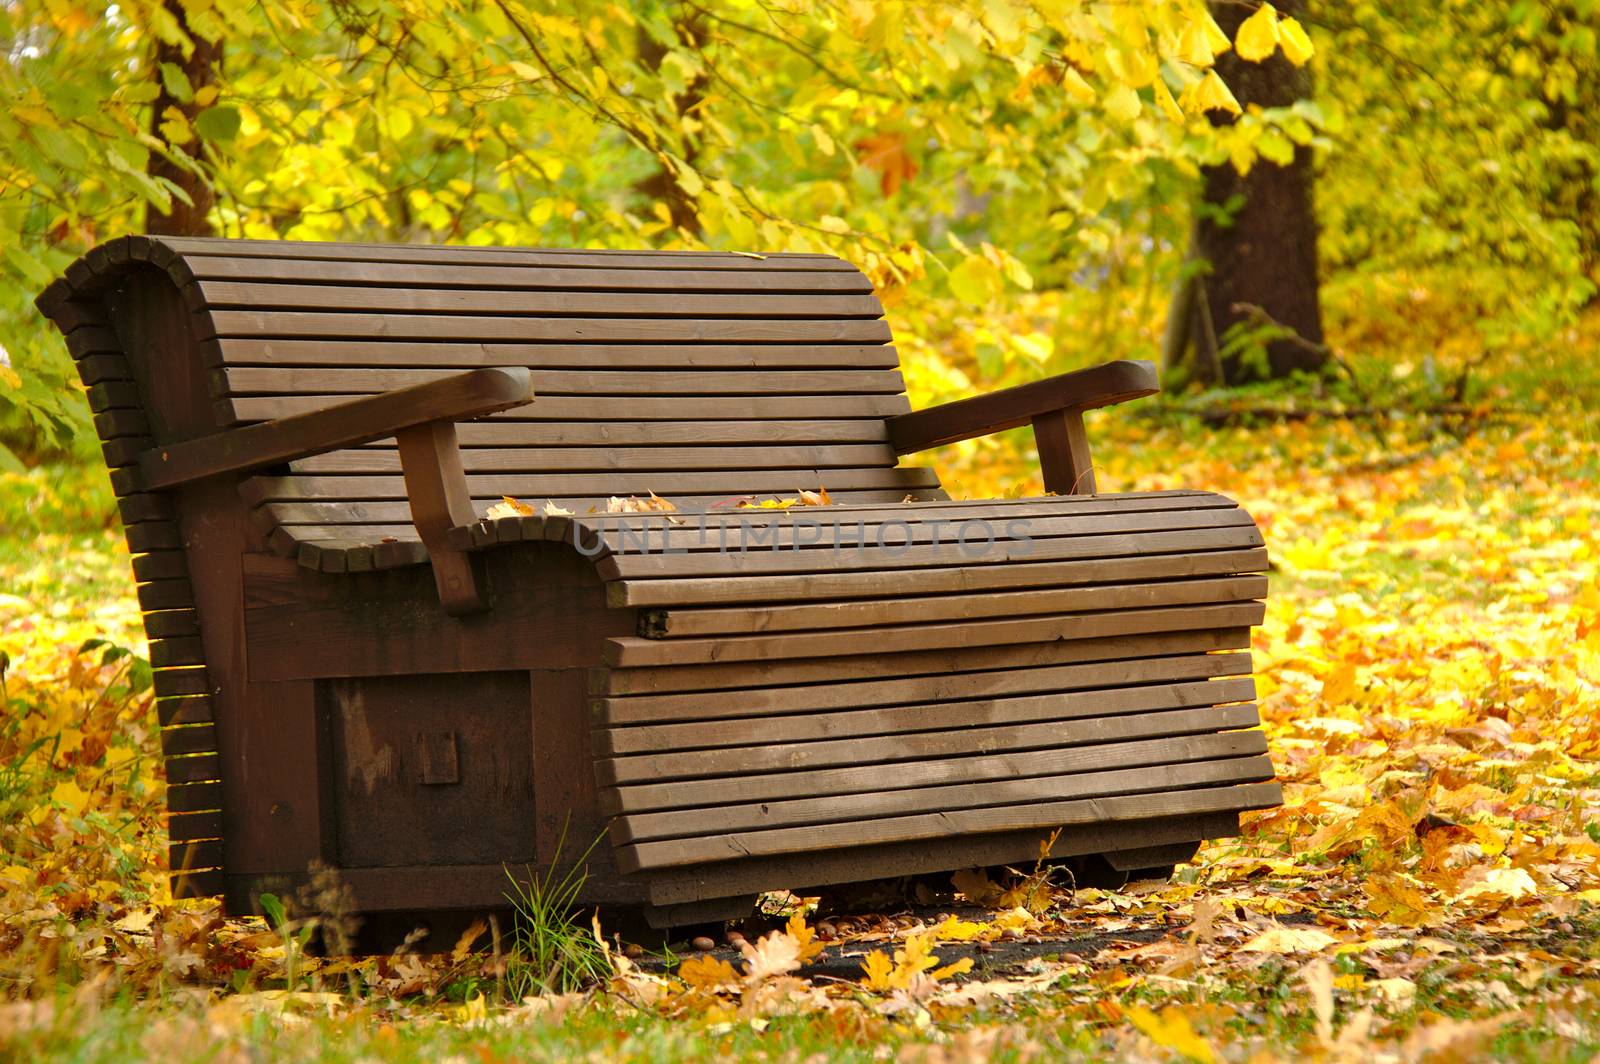 Old wooden bench in the park on a beautiful autumn day. Surrounded with many golden fallen leaves